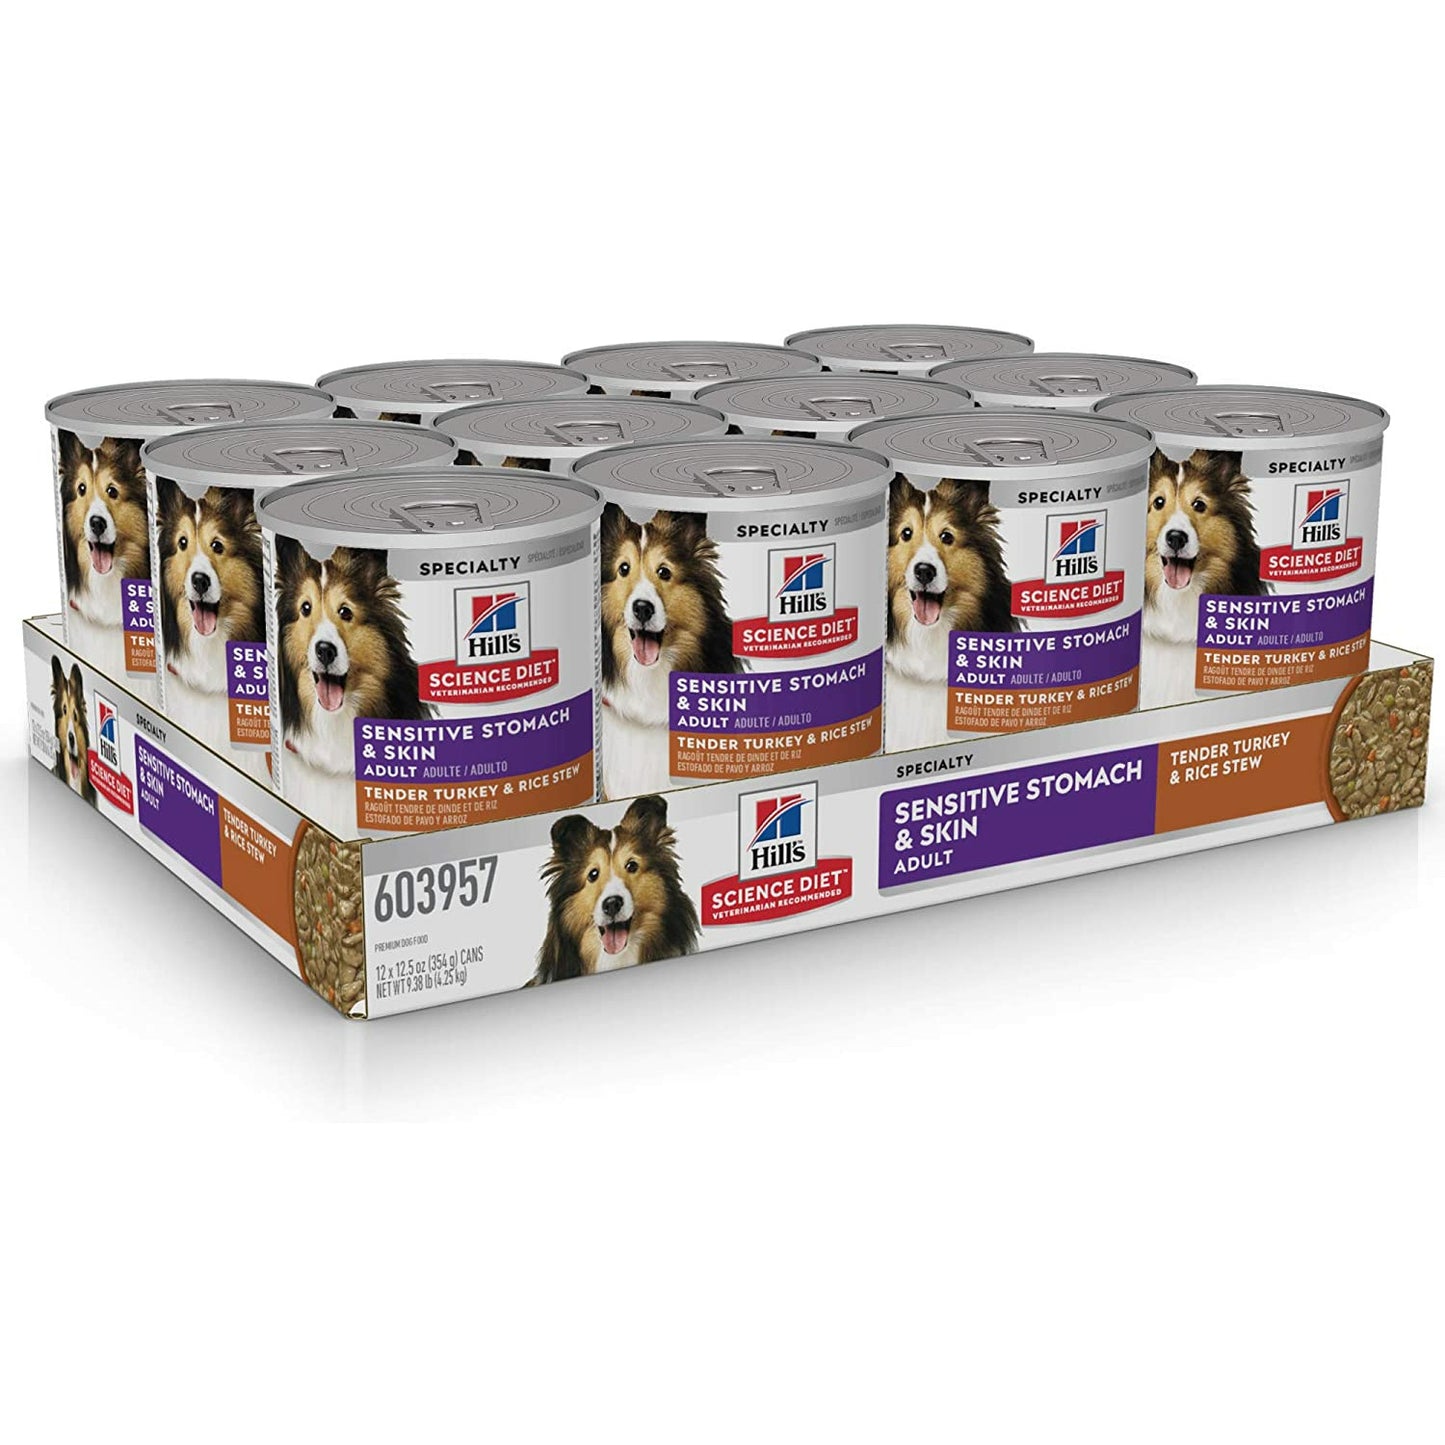 Hill's Science Diet Adult Sensitive Stomach & Skin Tender Turkey & Rice Stew dog food  Canned Dog Food  | PetMax Canada